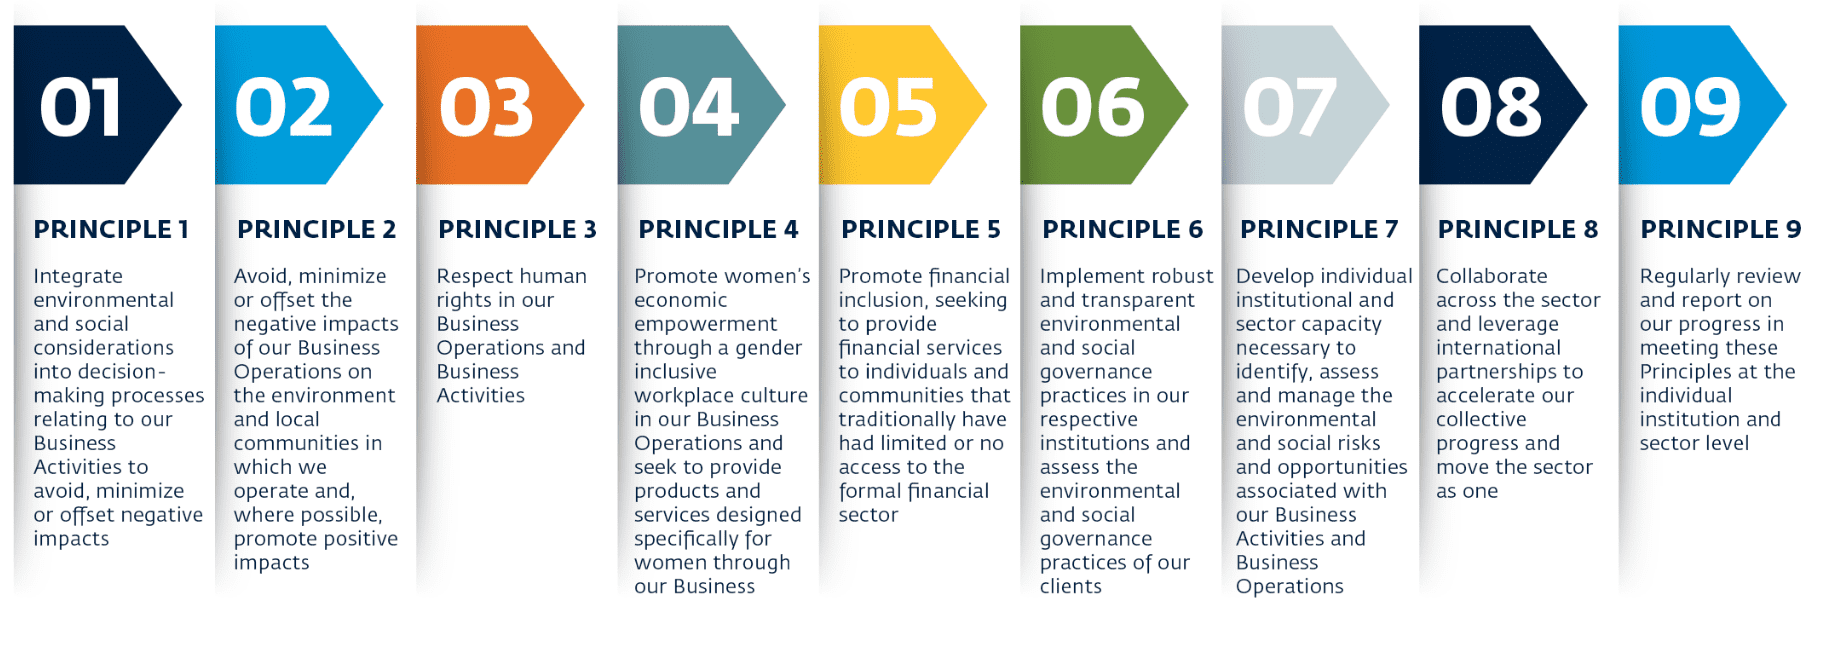 The Principles in detail